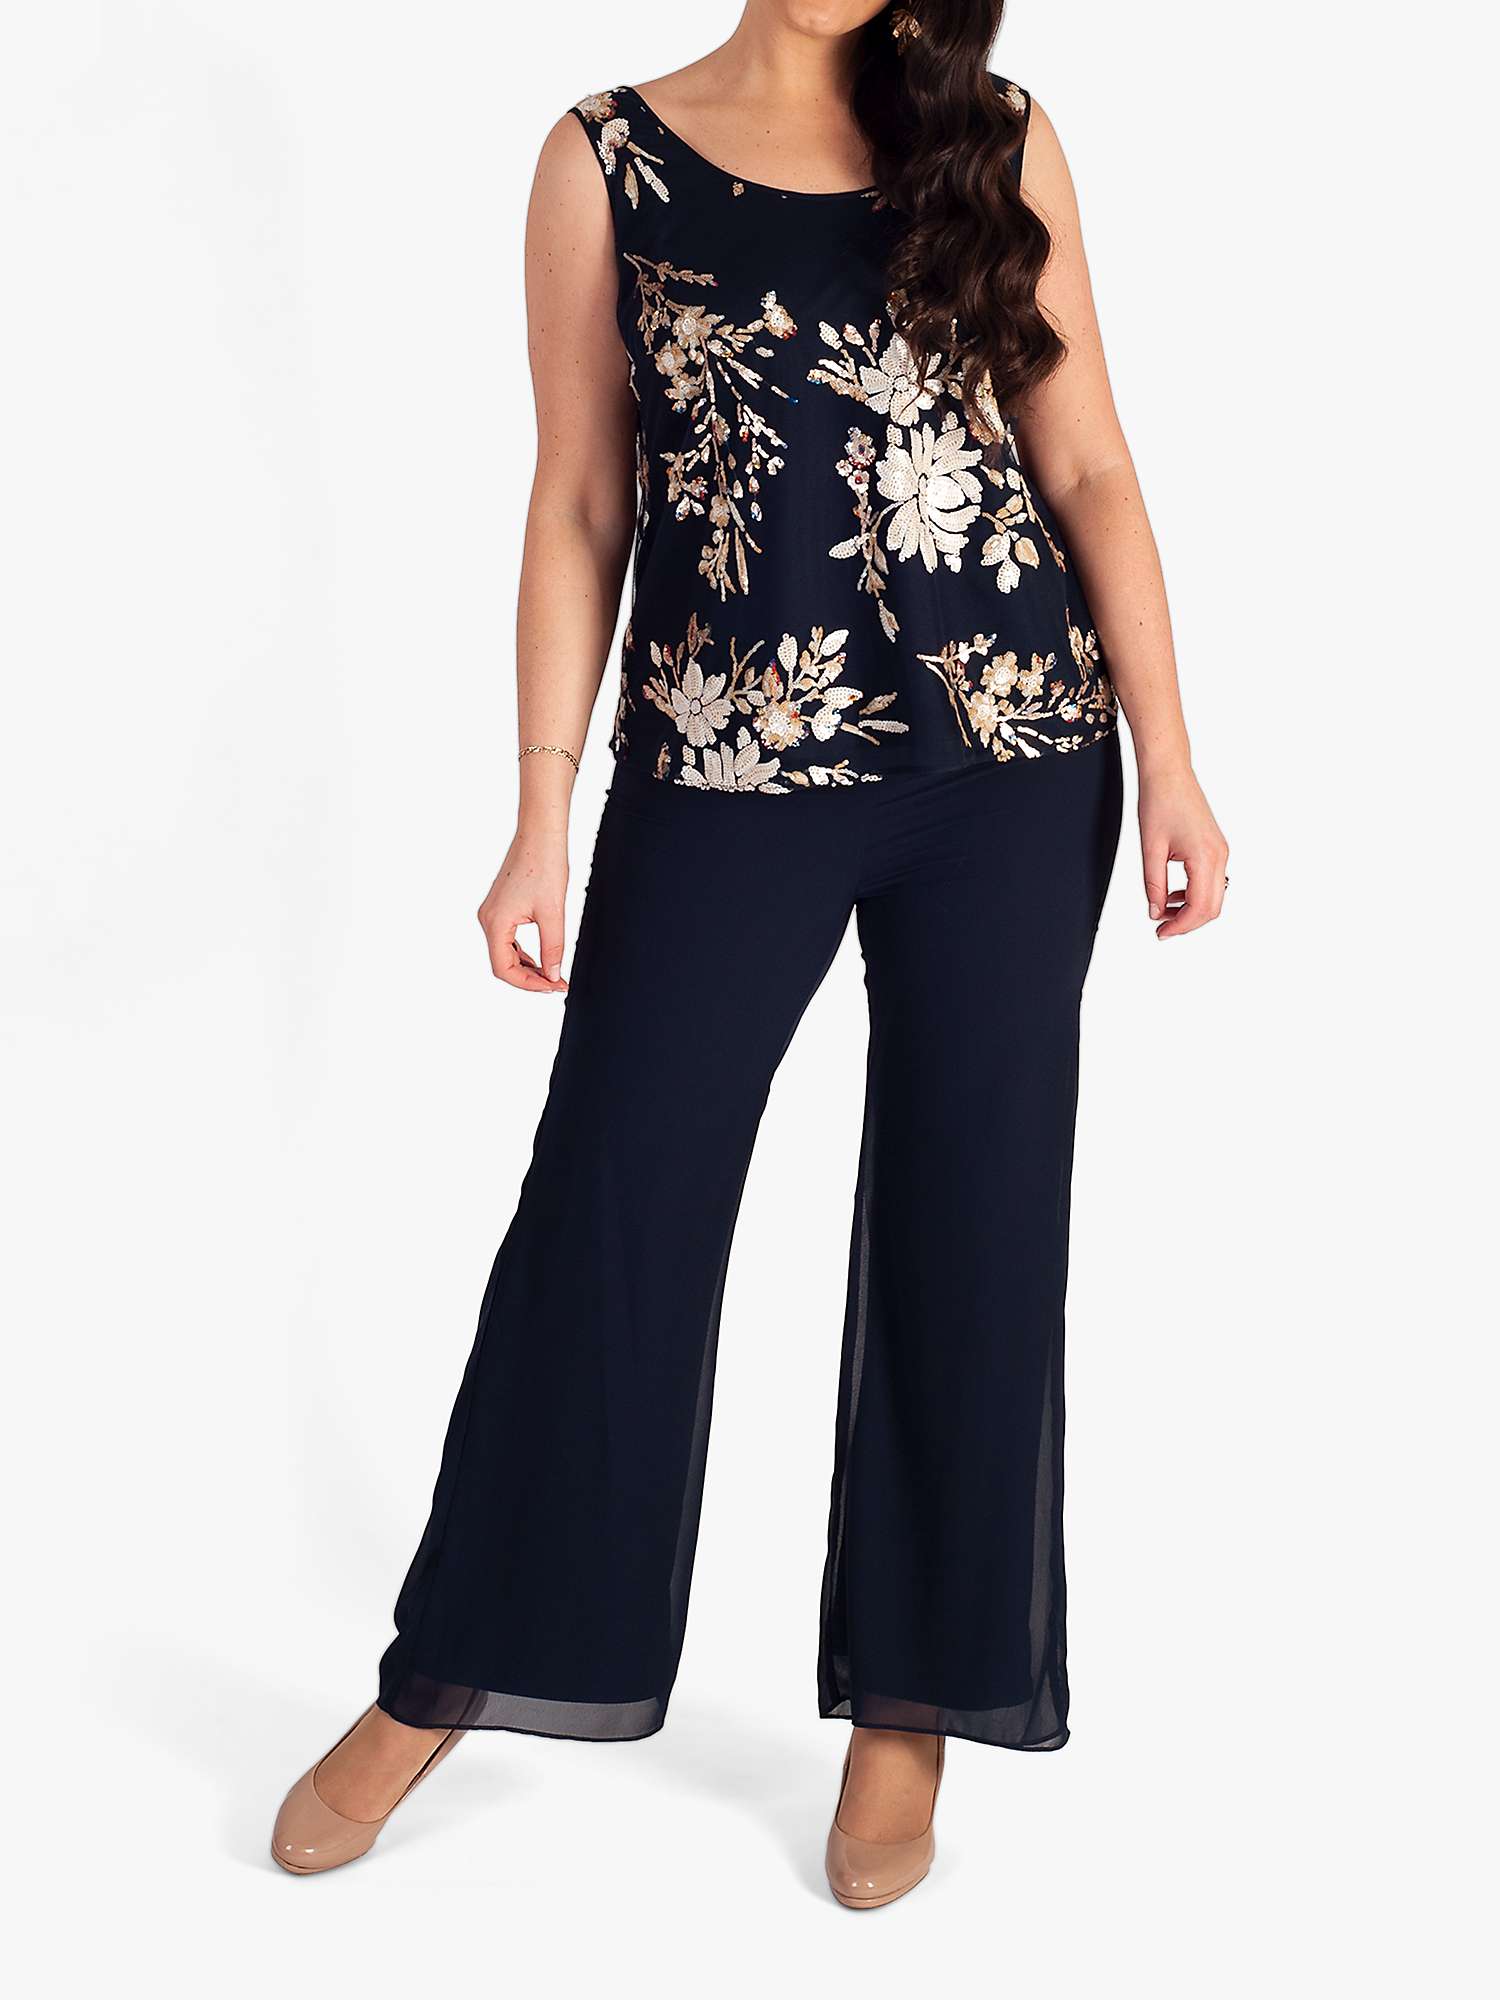 Buy chesca Embroidered Sequin Sleeveless Top, Navy Online at johnlewis.com